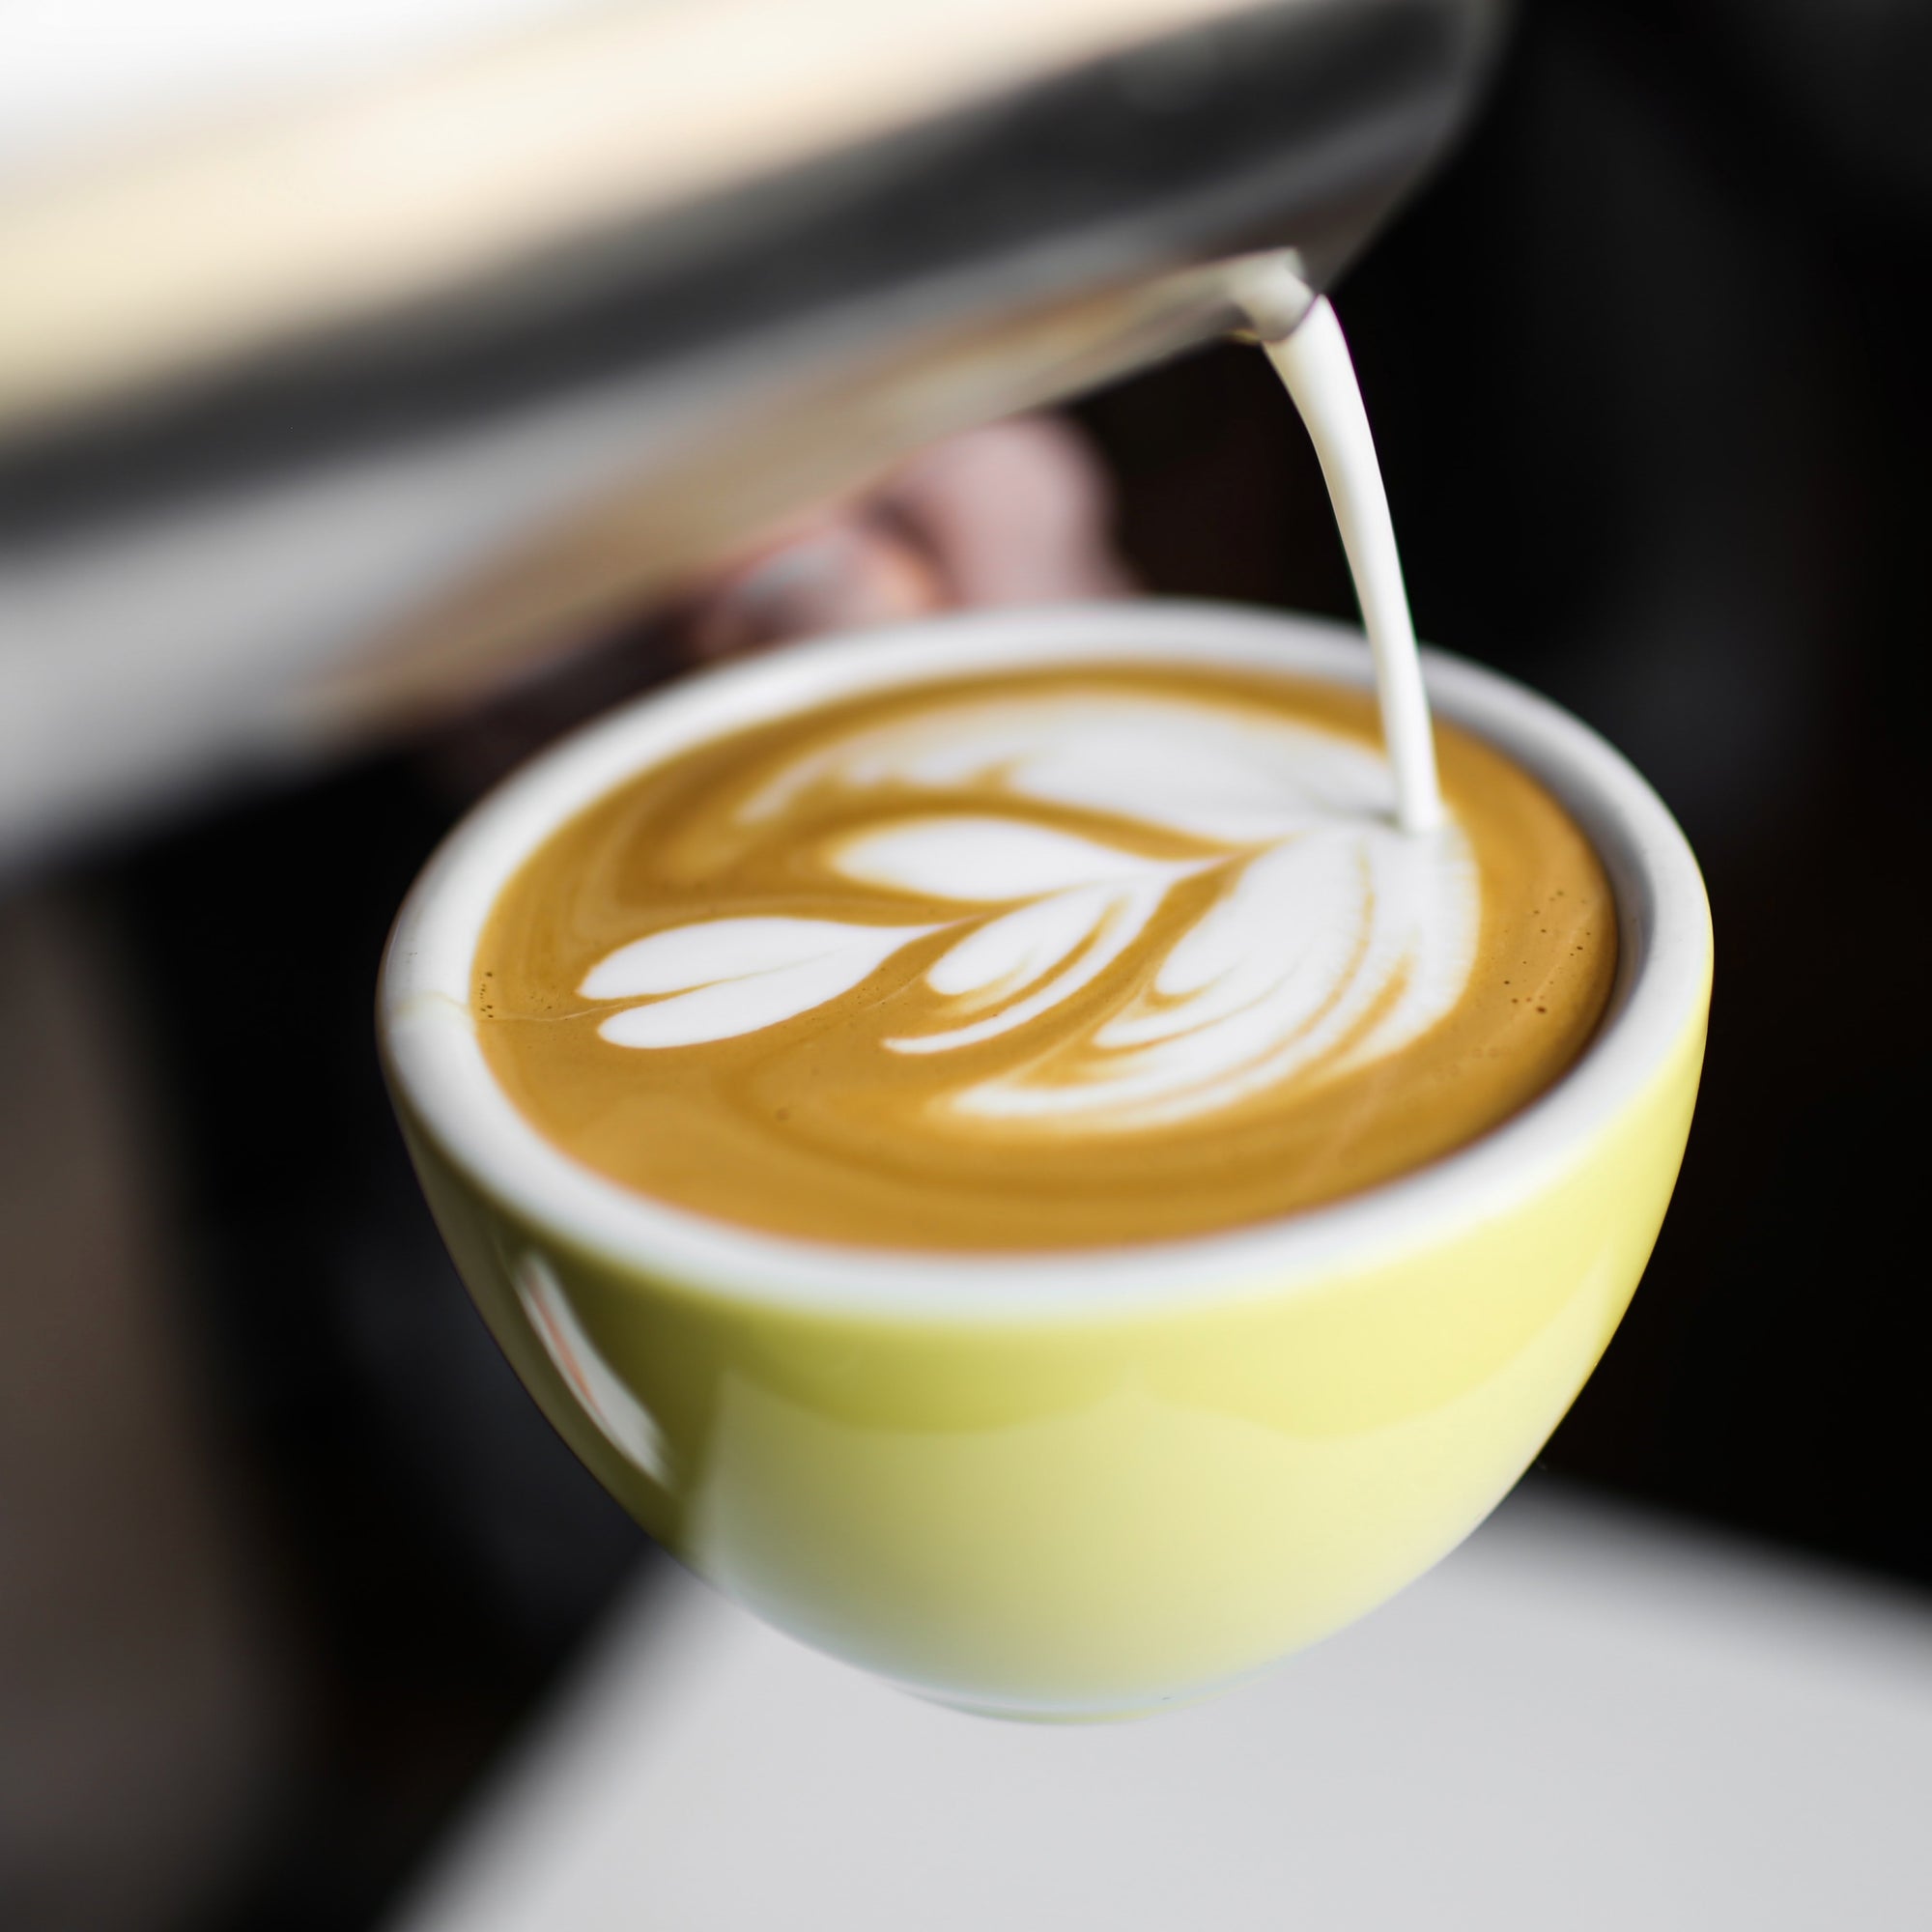 pouring latte art into a yellow coffee cup